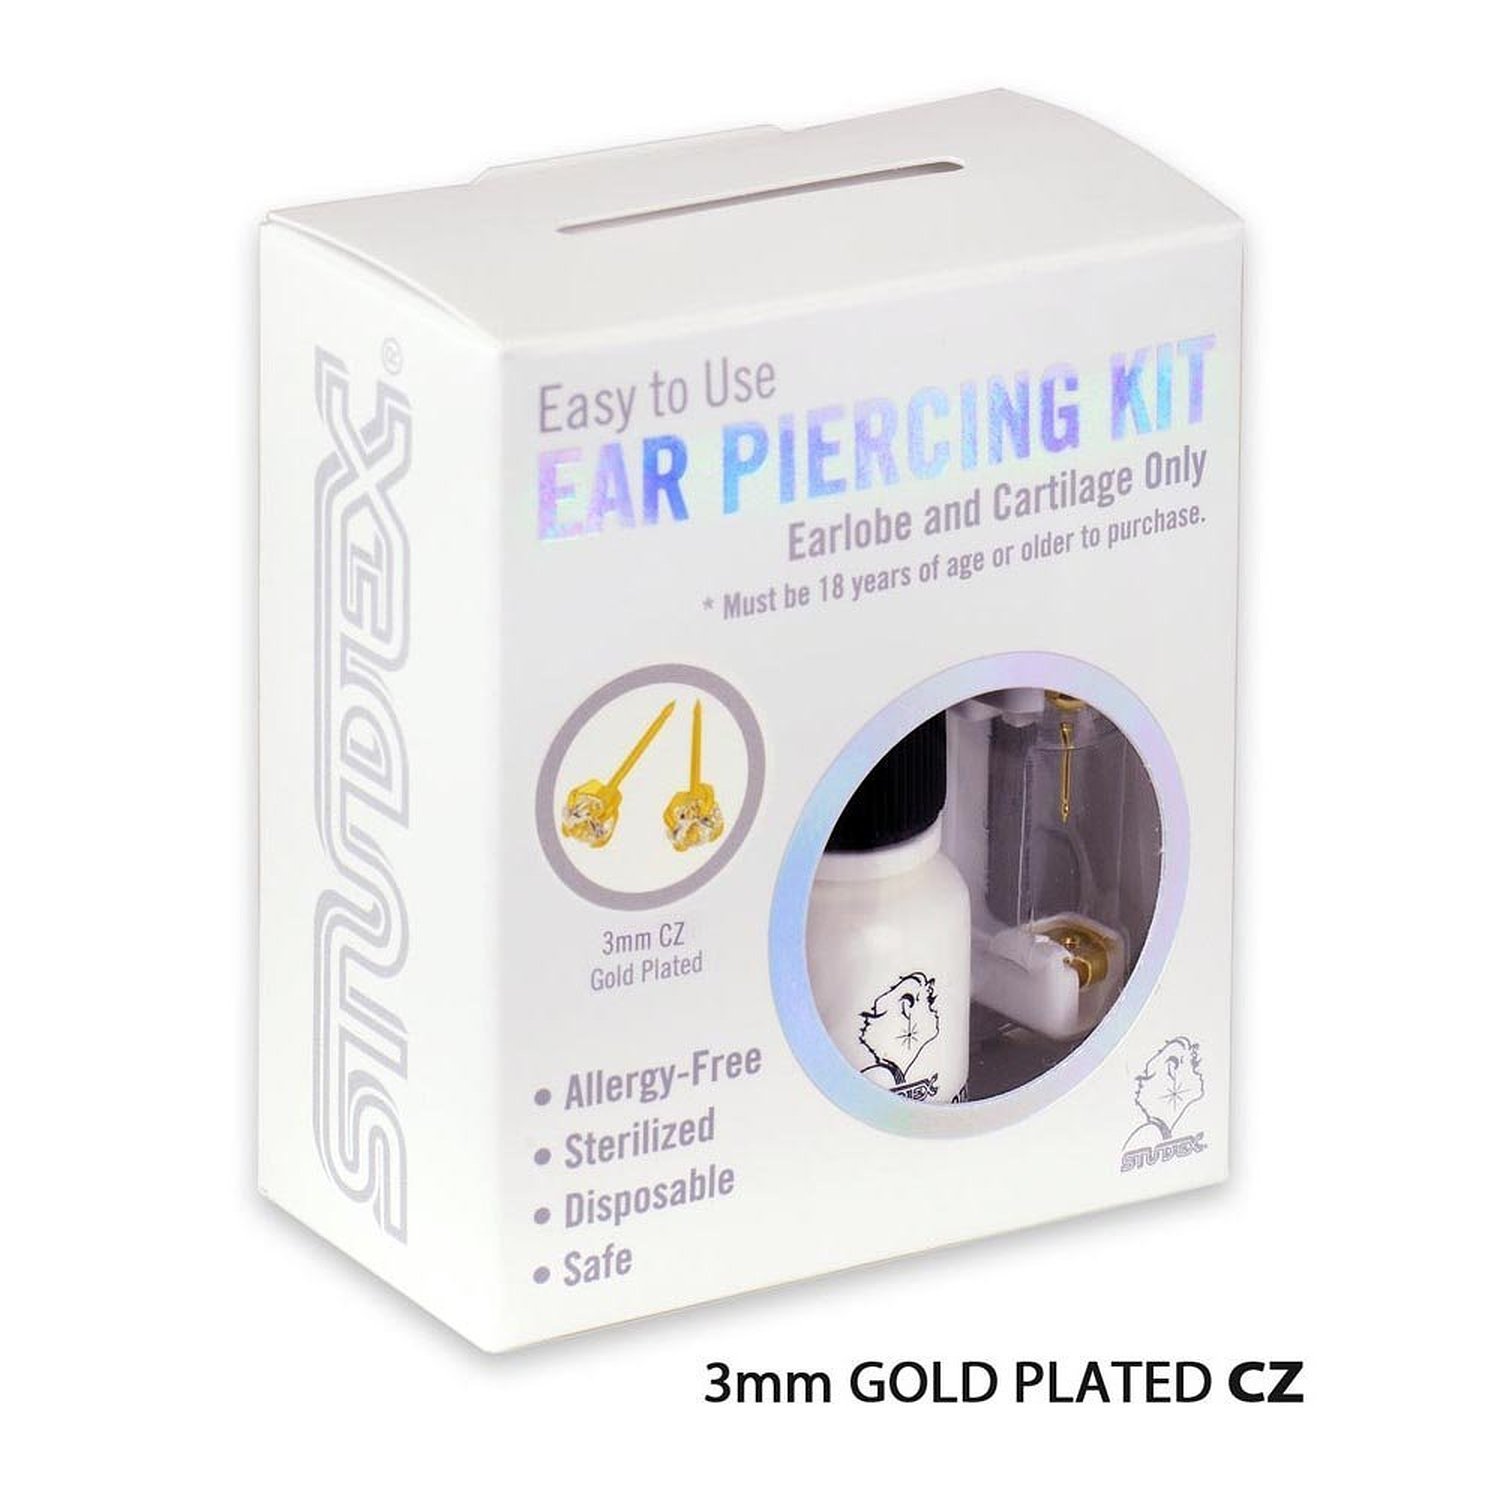 Special Deal: 2 Sets System 75 Personal Ear Piercer Piercing Studs - $20.99